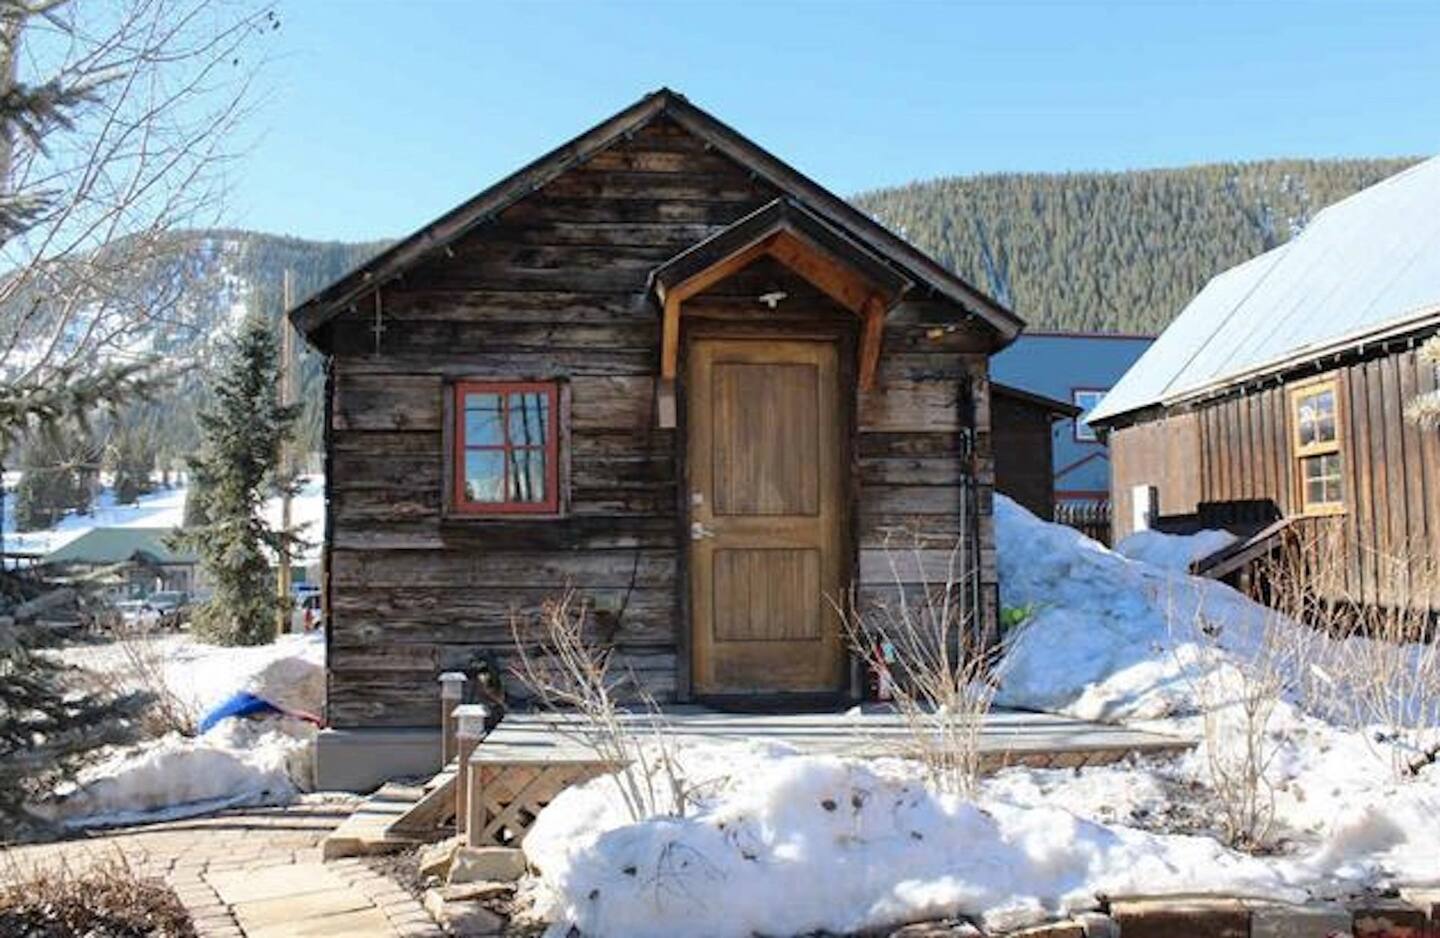 Miner's Cabin, one of the best airbnbs in Colorado